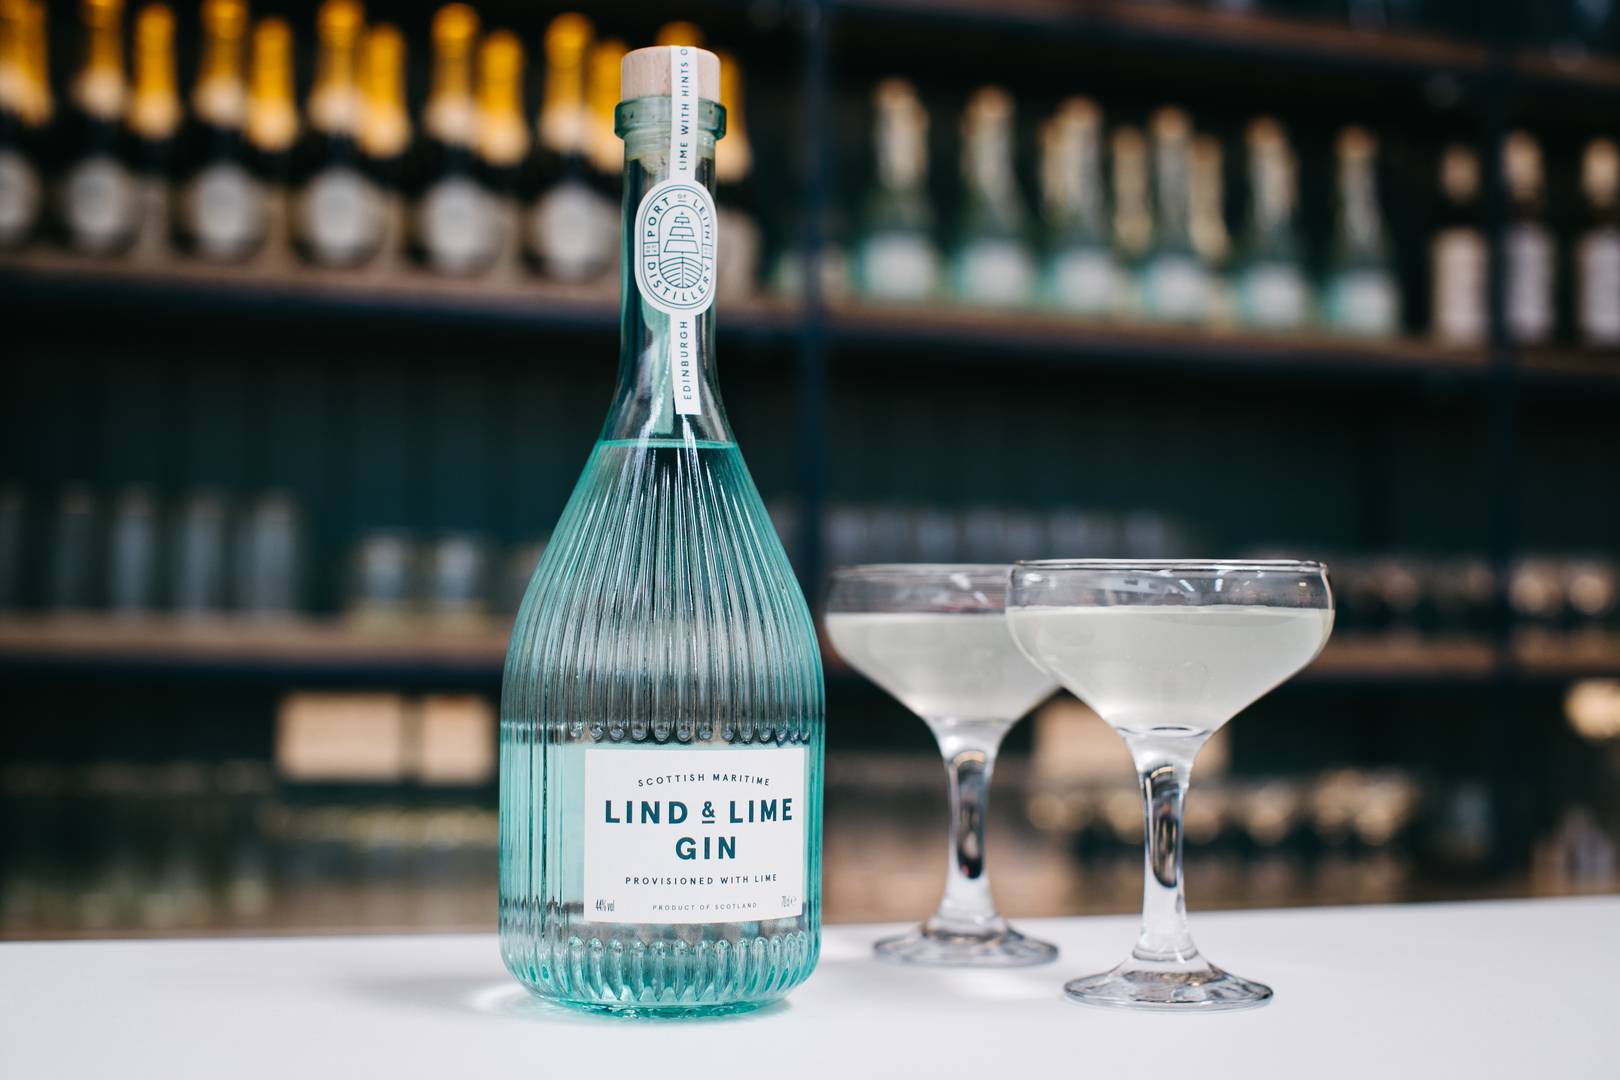 Lind & Lime Gin bottle and Gimlet cocktails, All Copyright Reserved